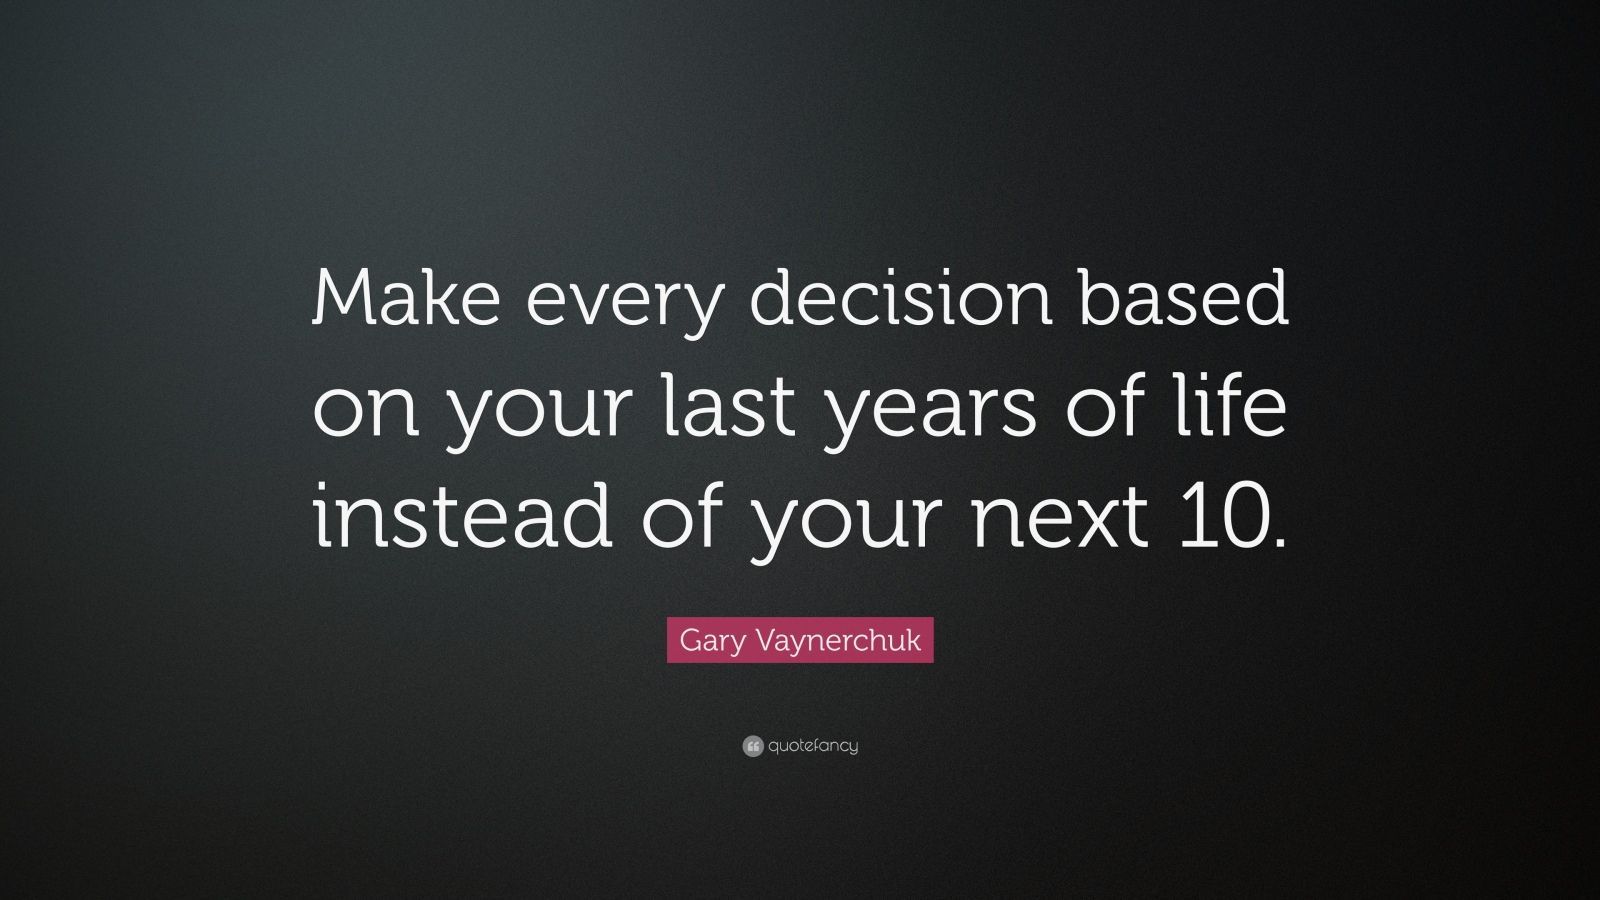 Gary Vaynerchuk Quote: “Make every decision based on your last